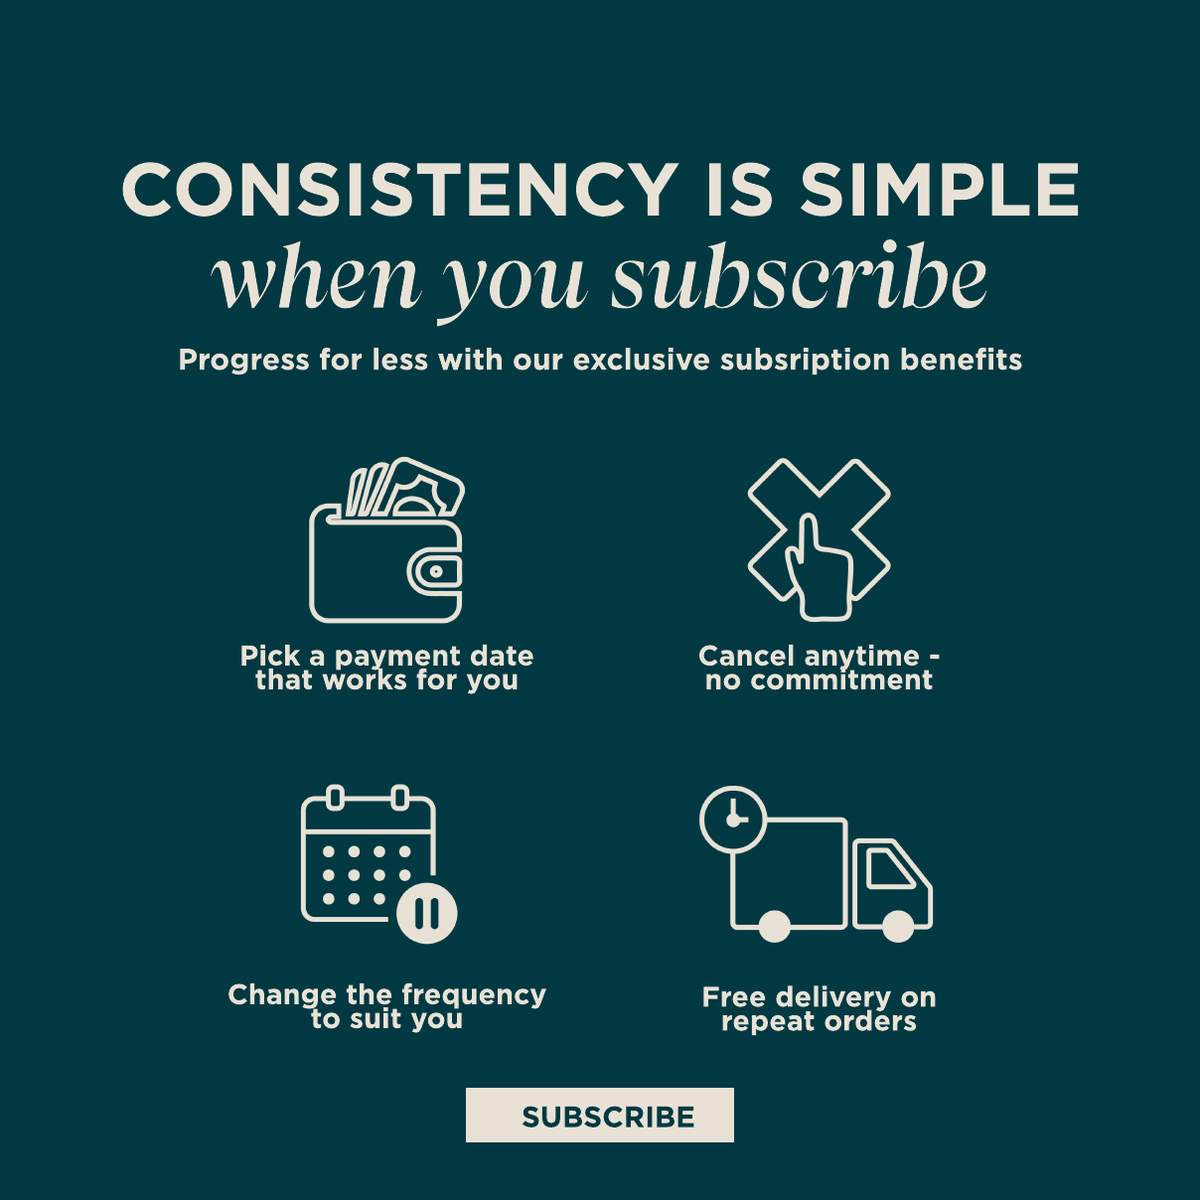 Consistency is simple when you subscribe. Progress for less with our exclusive subscription benefits. Pick a payment date that works for you. Change the frequency. Cancel Anytime. Free delivery on repeat orders. Subscribe